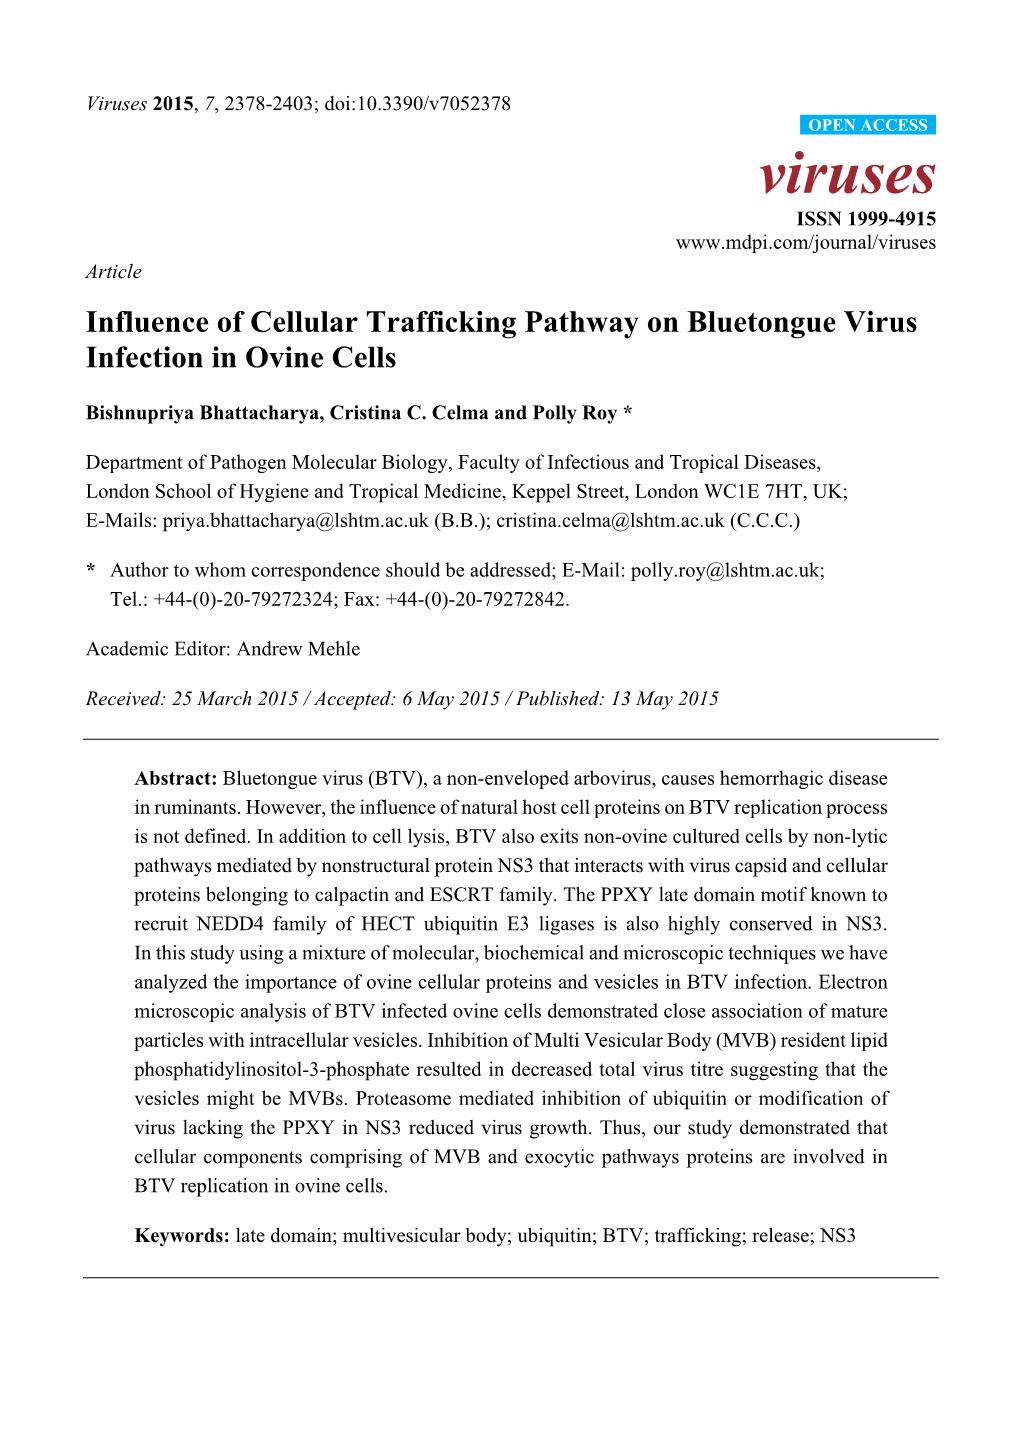 Influence of Cellular Trafficking Pathway on Bluetongue Virus Infection in Ovine Cells